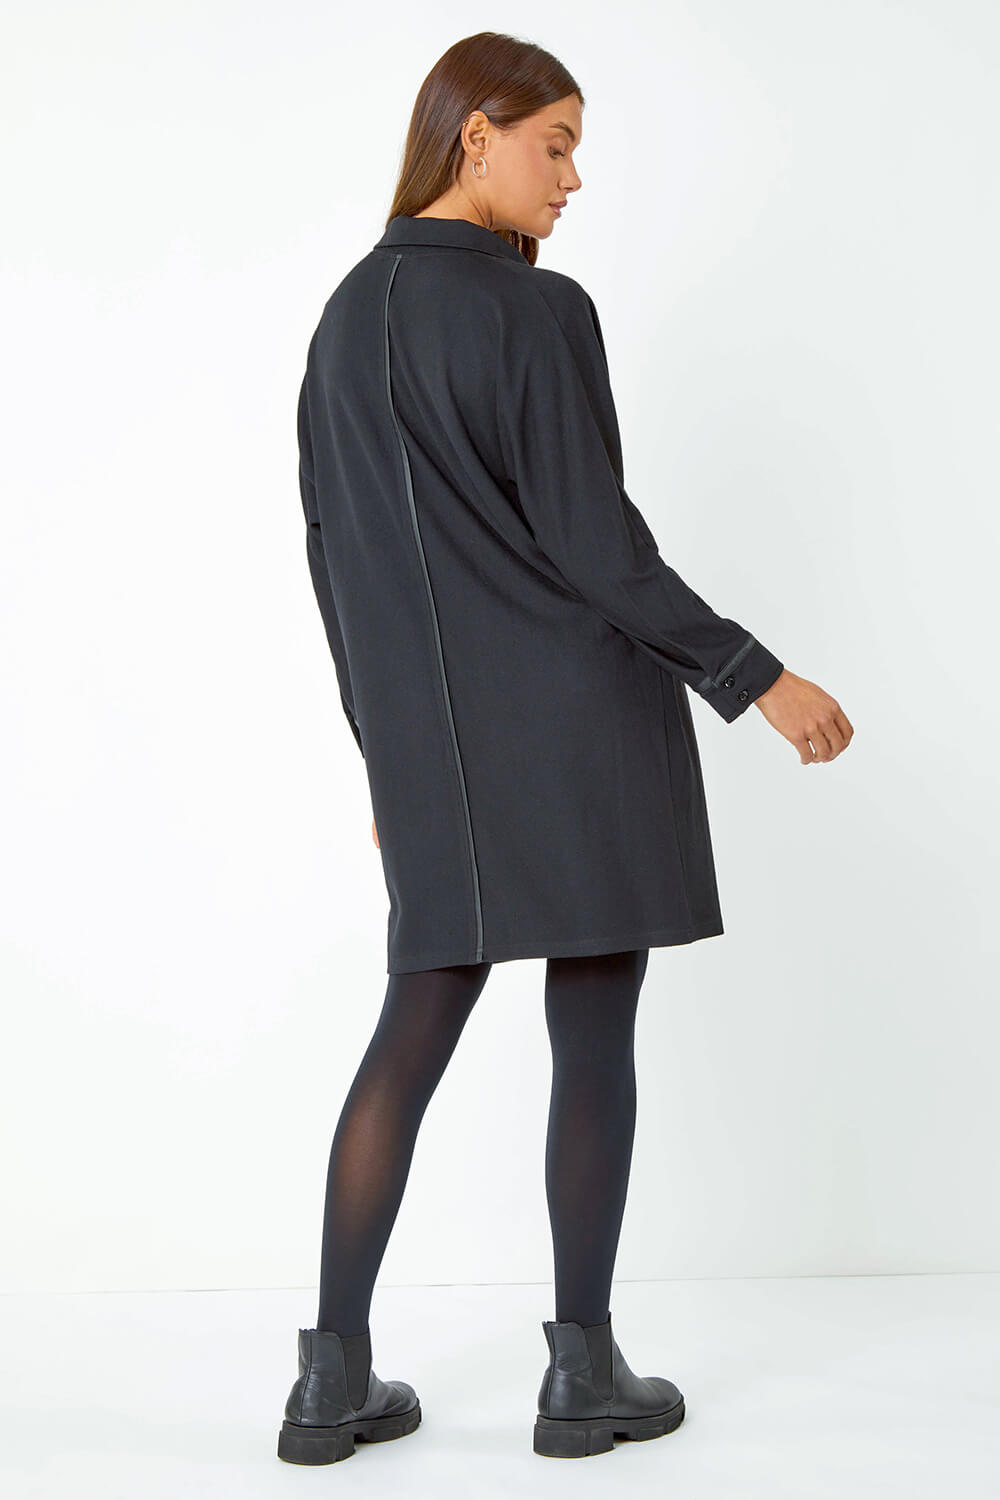 Black Zip Detail Cocoon Stretch Dress, Image 3 of 5